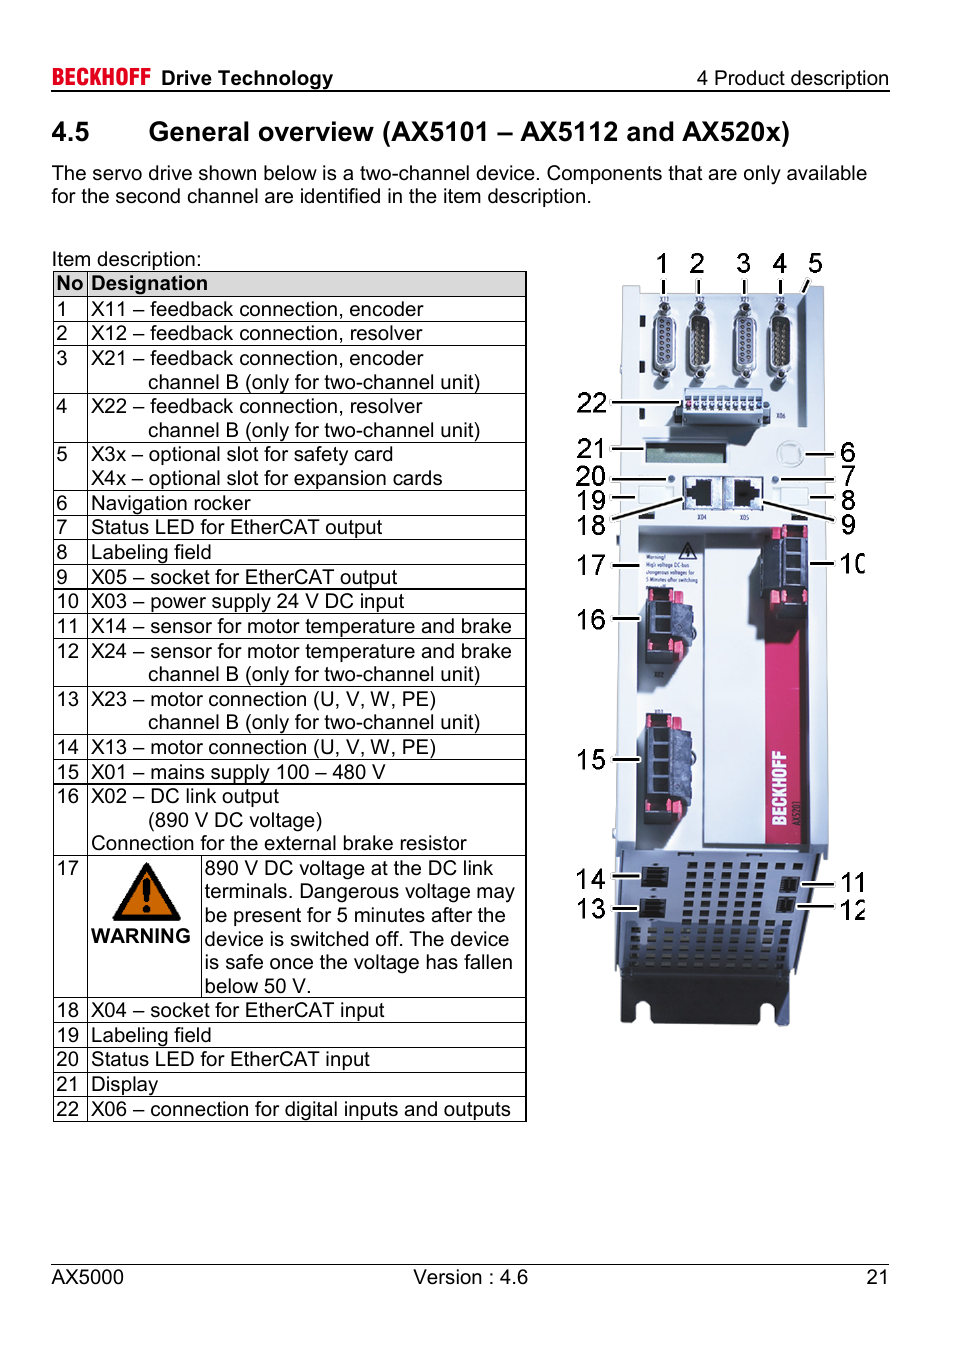 5 general overview (ax5101 – ax5112 and ax520x) | BECKHOFF AX5000 1,5 A -  40 A User Manual | Page 21 / 46